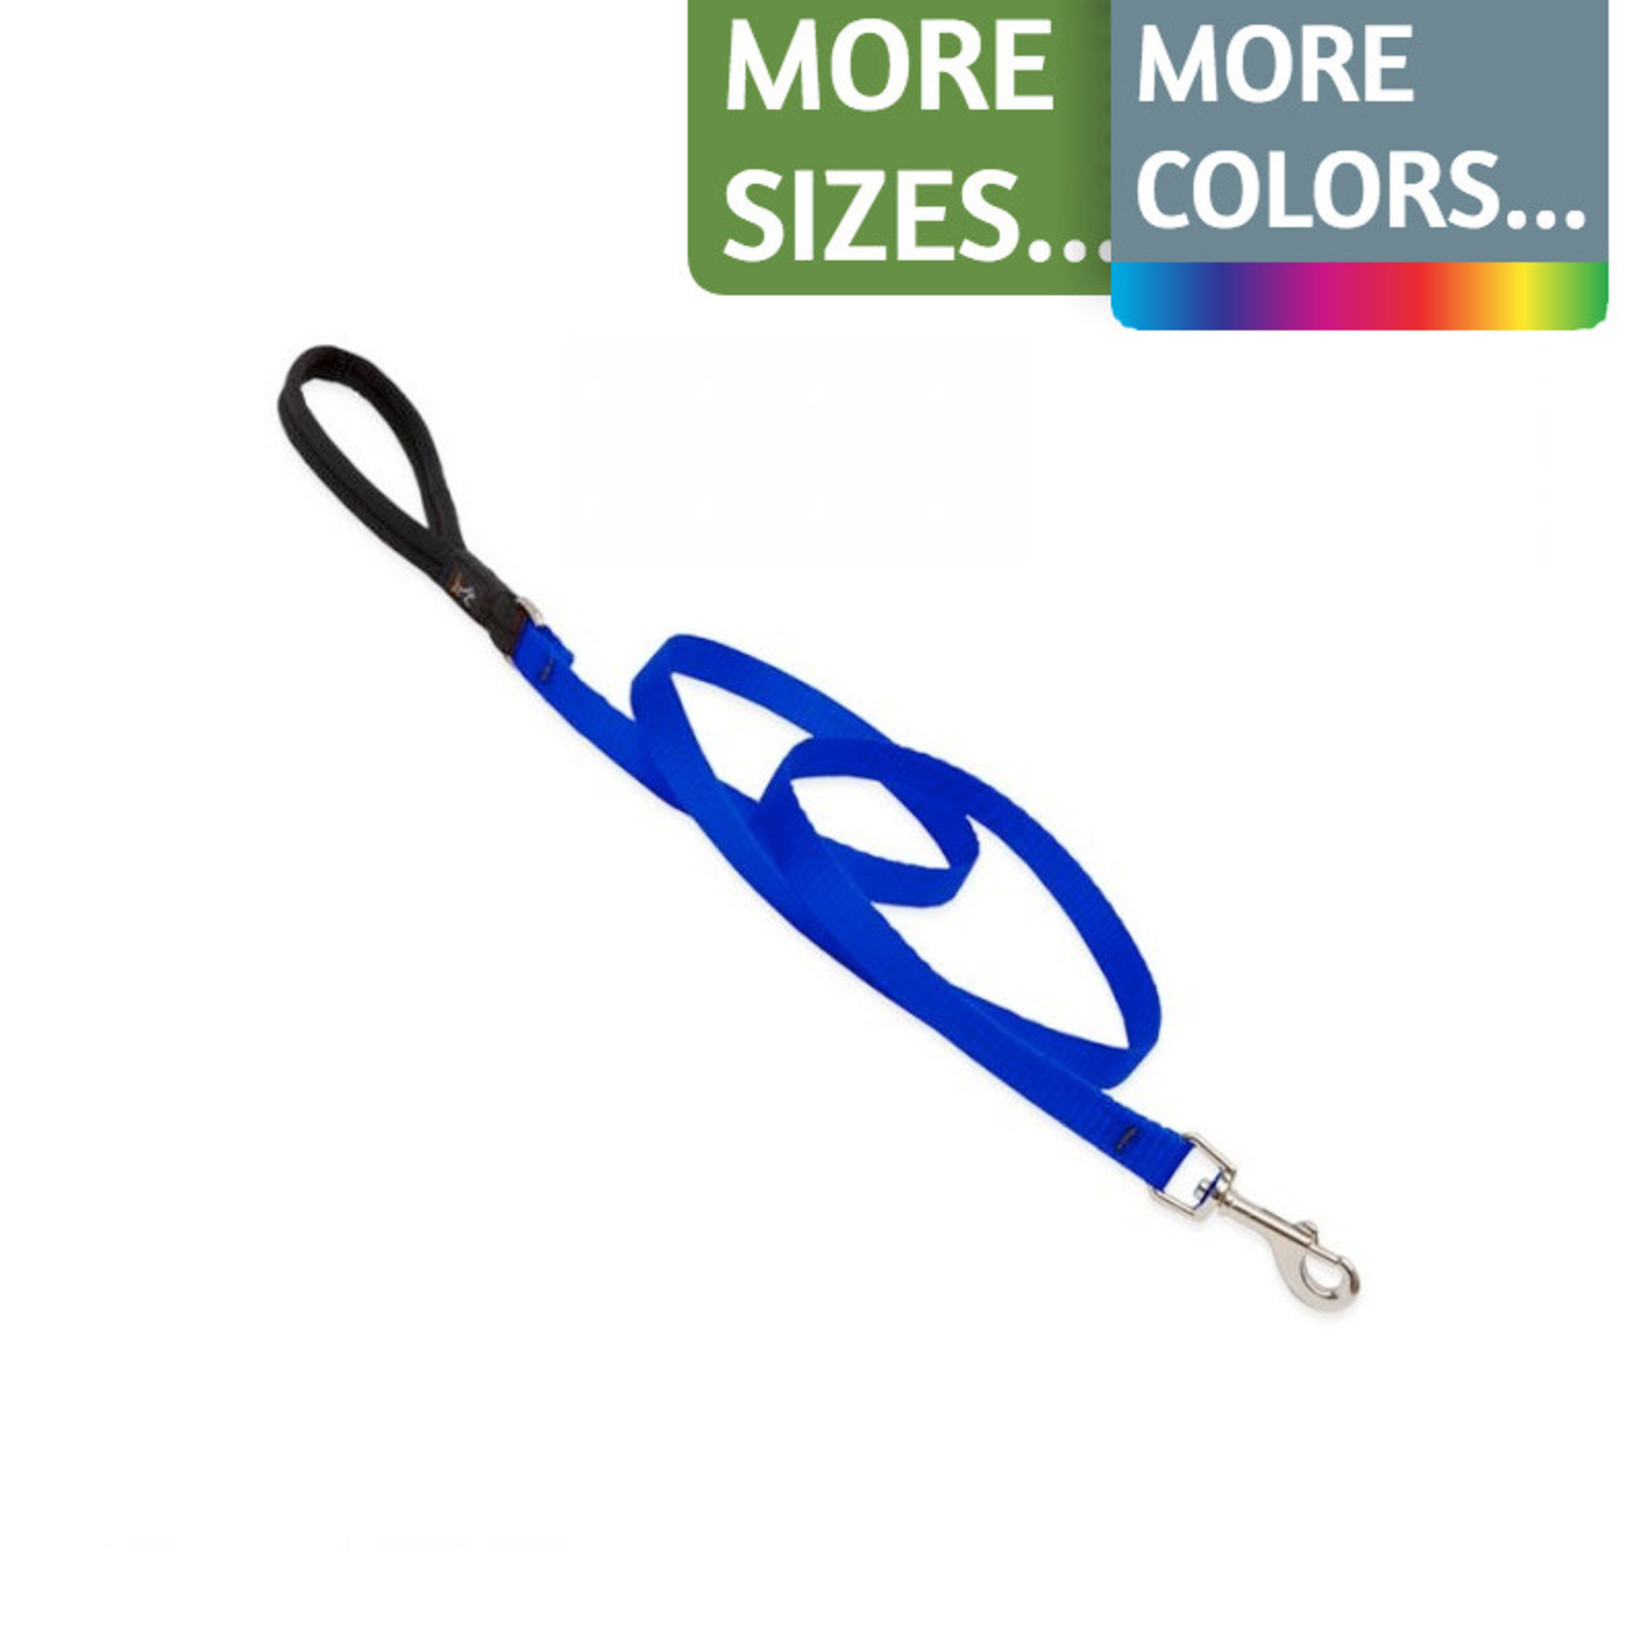 Lupine Lupine 1/2in Wide Dog Leads with Padded Handle in 4ft or 6ft Length Assorted Colors